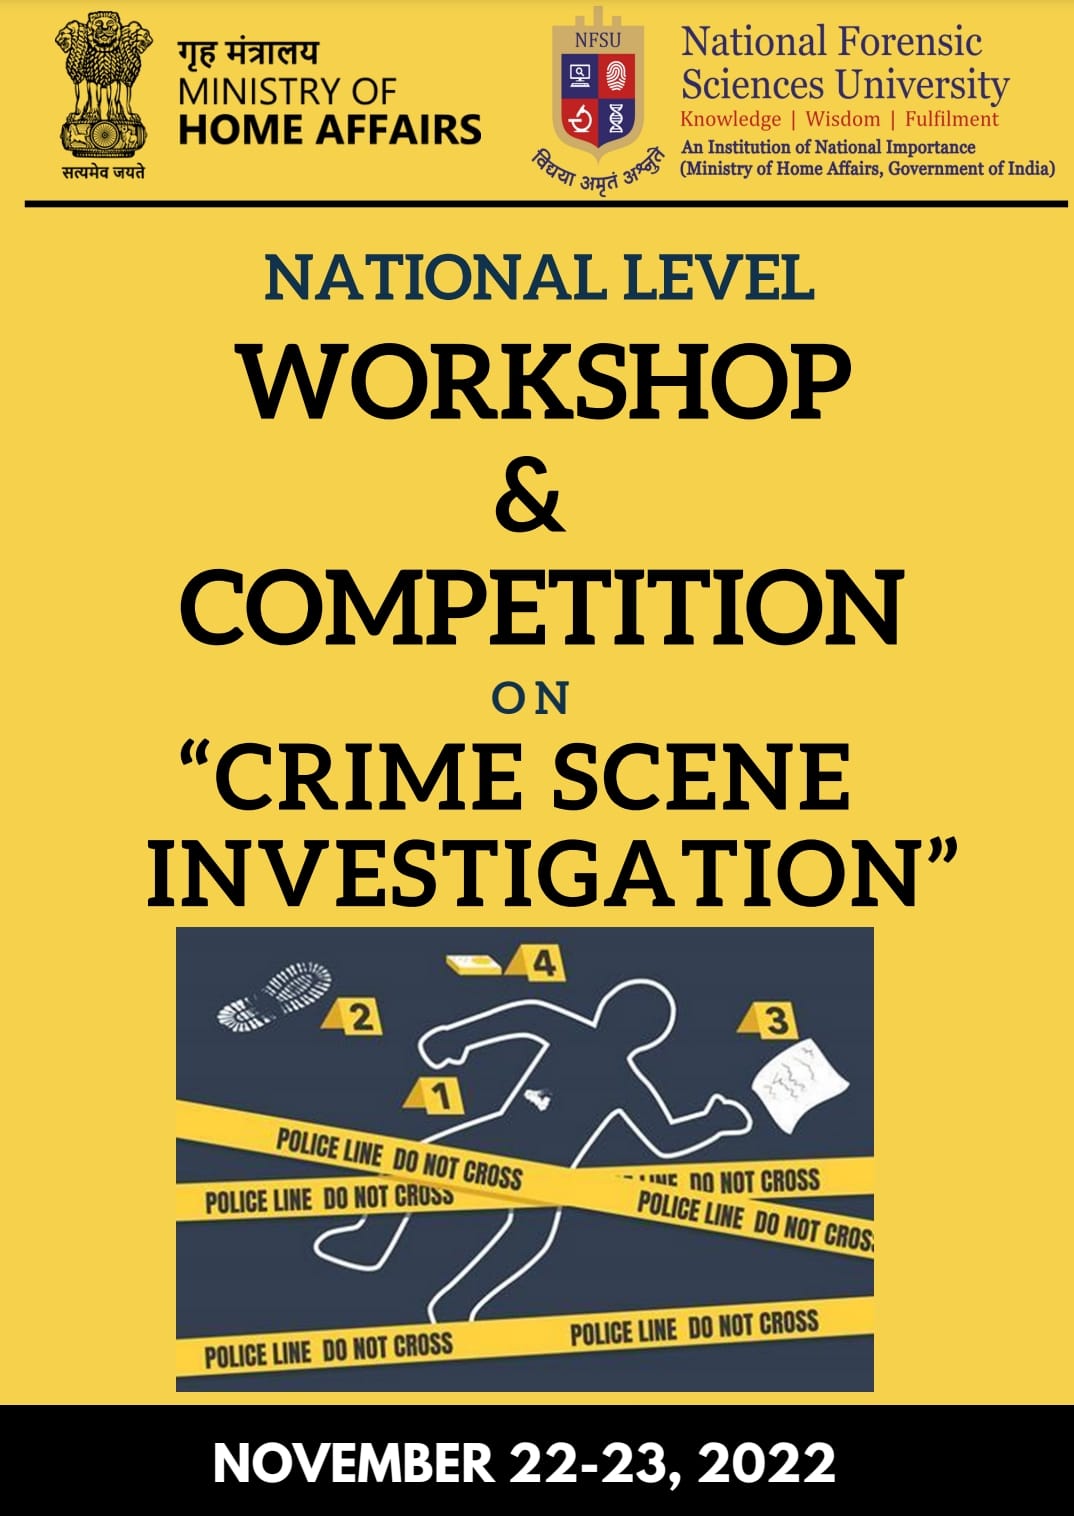 TWO-DAY NATIONAL-LEVEL WORKSHOP AND COMPETITION ON CRIME SCENE INVESTIGATION FROM NOVEMBER 22-23, 2022